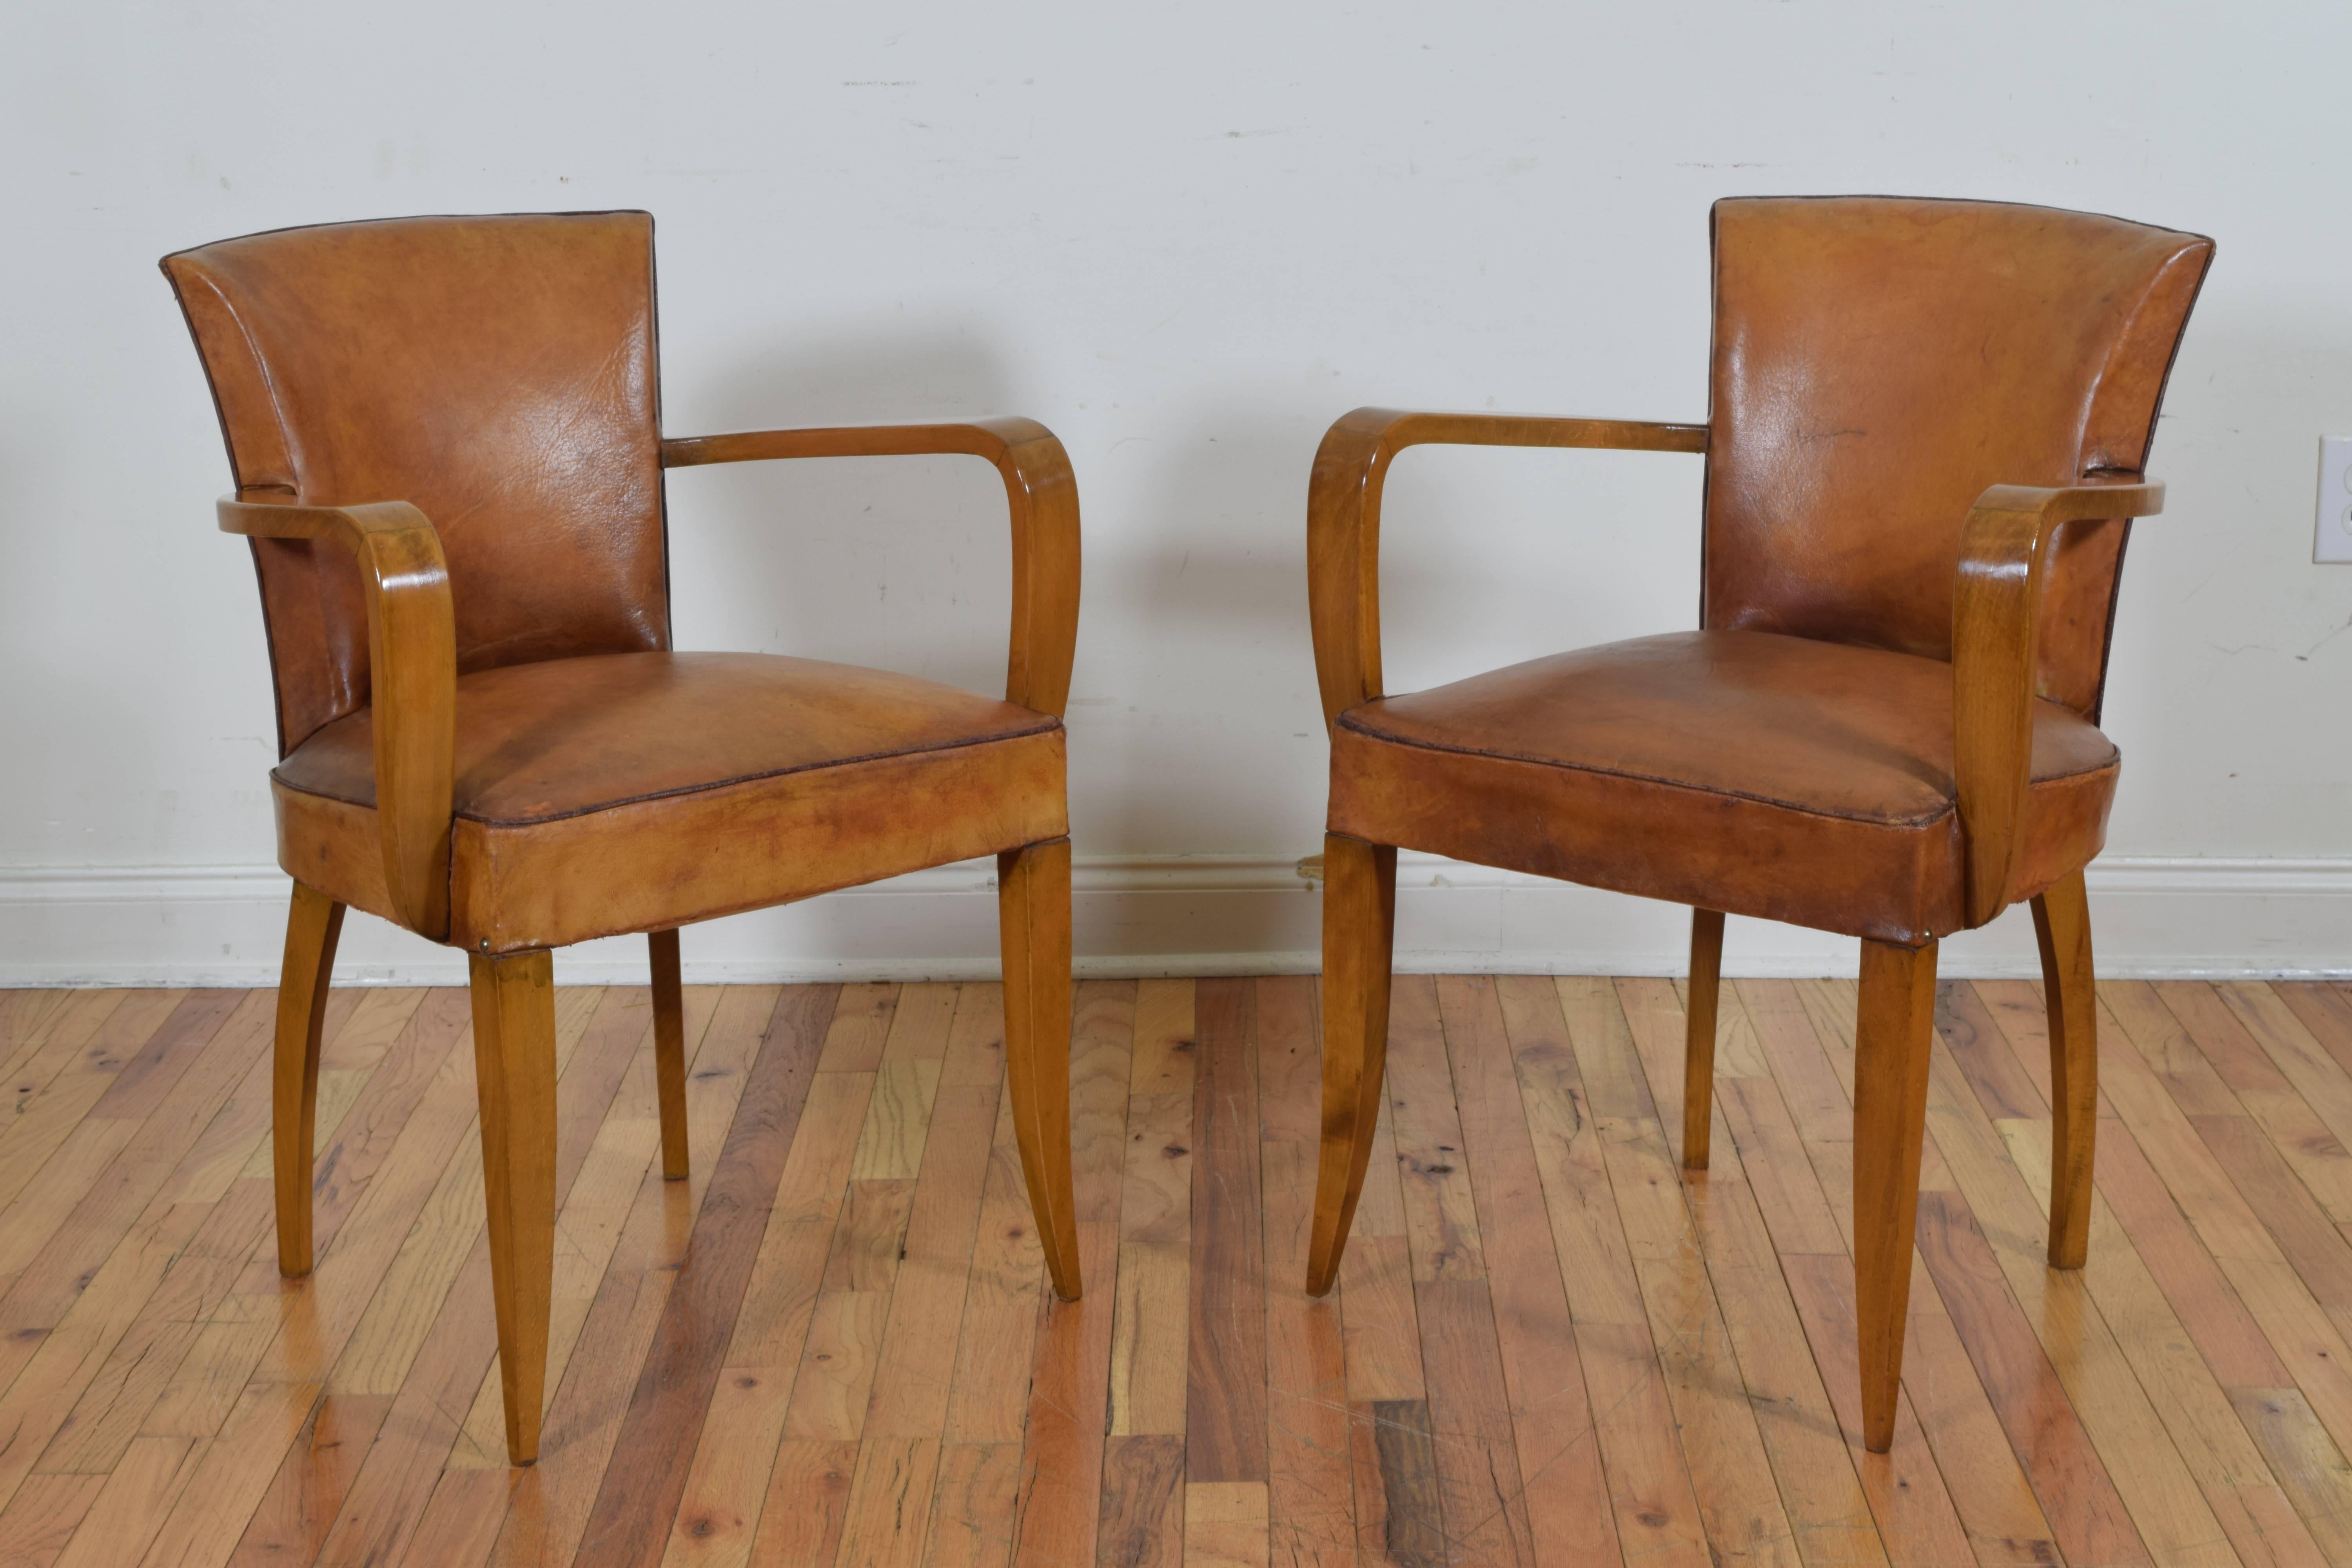 having concave backrests, curved wooden arm supports, flared legs, the leather upholstery in excellent condition and trimmed in a darker leather piping with nailheads on the back of the backrests